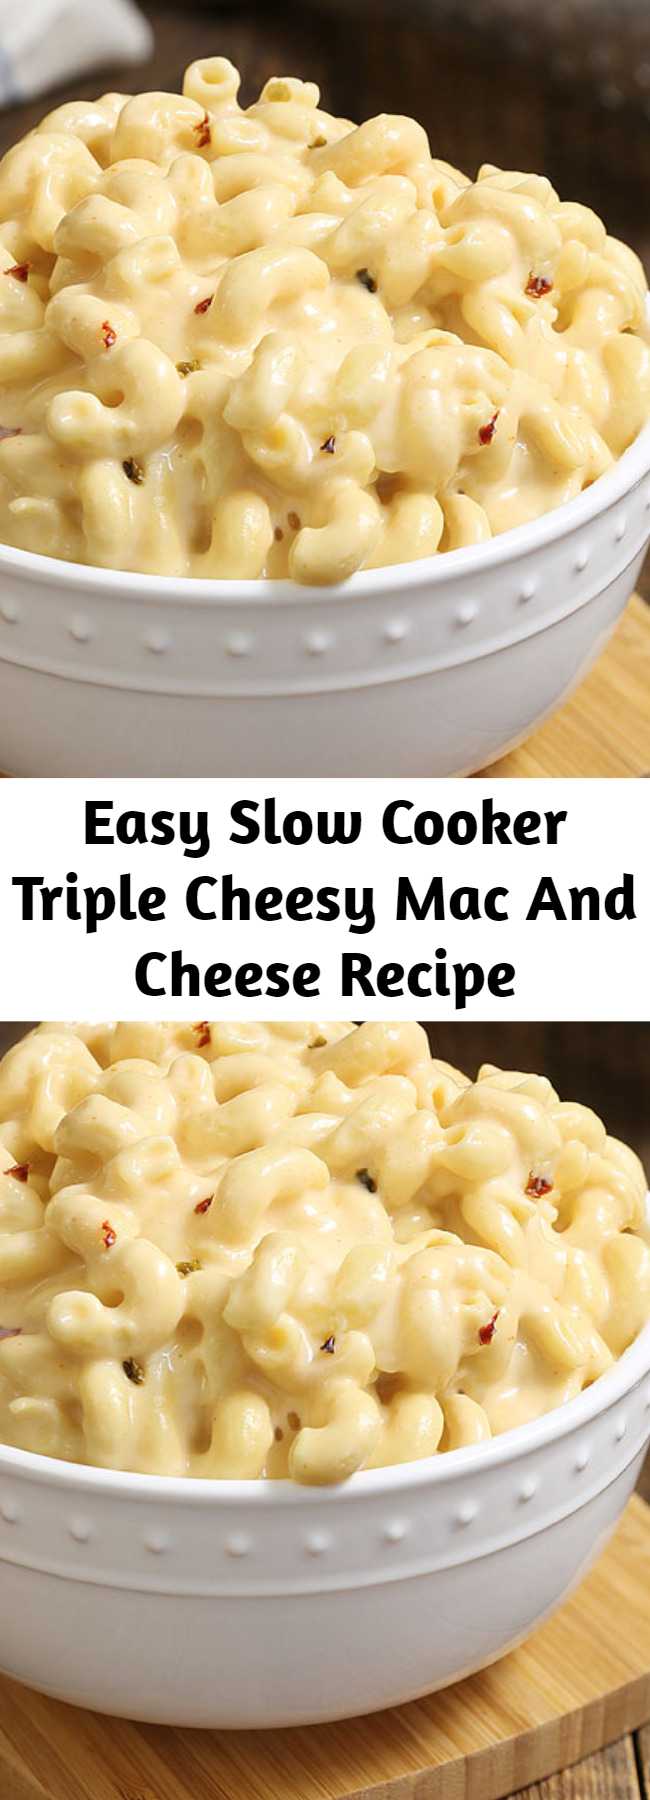 Easy Slow Cooker Triple Cheesy Mac And Cheese Recipe - A simple recipe that you can toss together in just 5 minutes. It’s pure comfort in a bowl, with perfectly tender corkscrew pasta with twists and ridges that capture the luscious pepper Jack and cheddar cheese sauce. It has just enough heat to wake up your taste buds. Check out the video above the recipe to see how easy this Best Ever Mac and Cheese is to make! #slowcooker #macandcheese